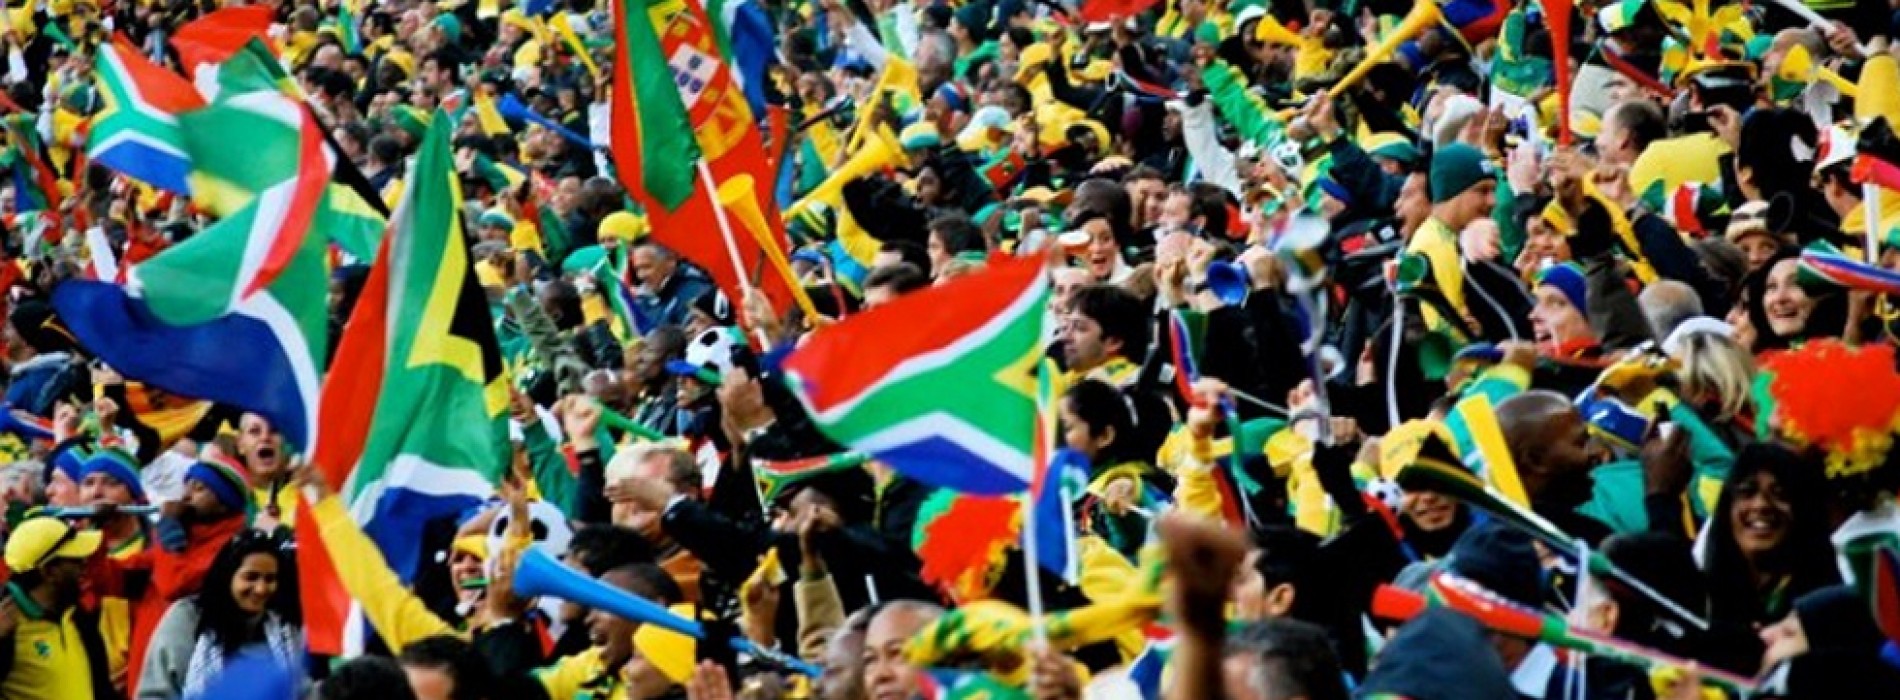 South African Tourism looks forward to welcoming Indian Cricket fans